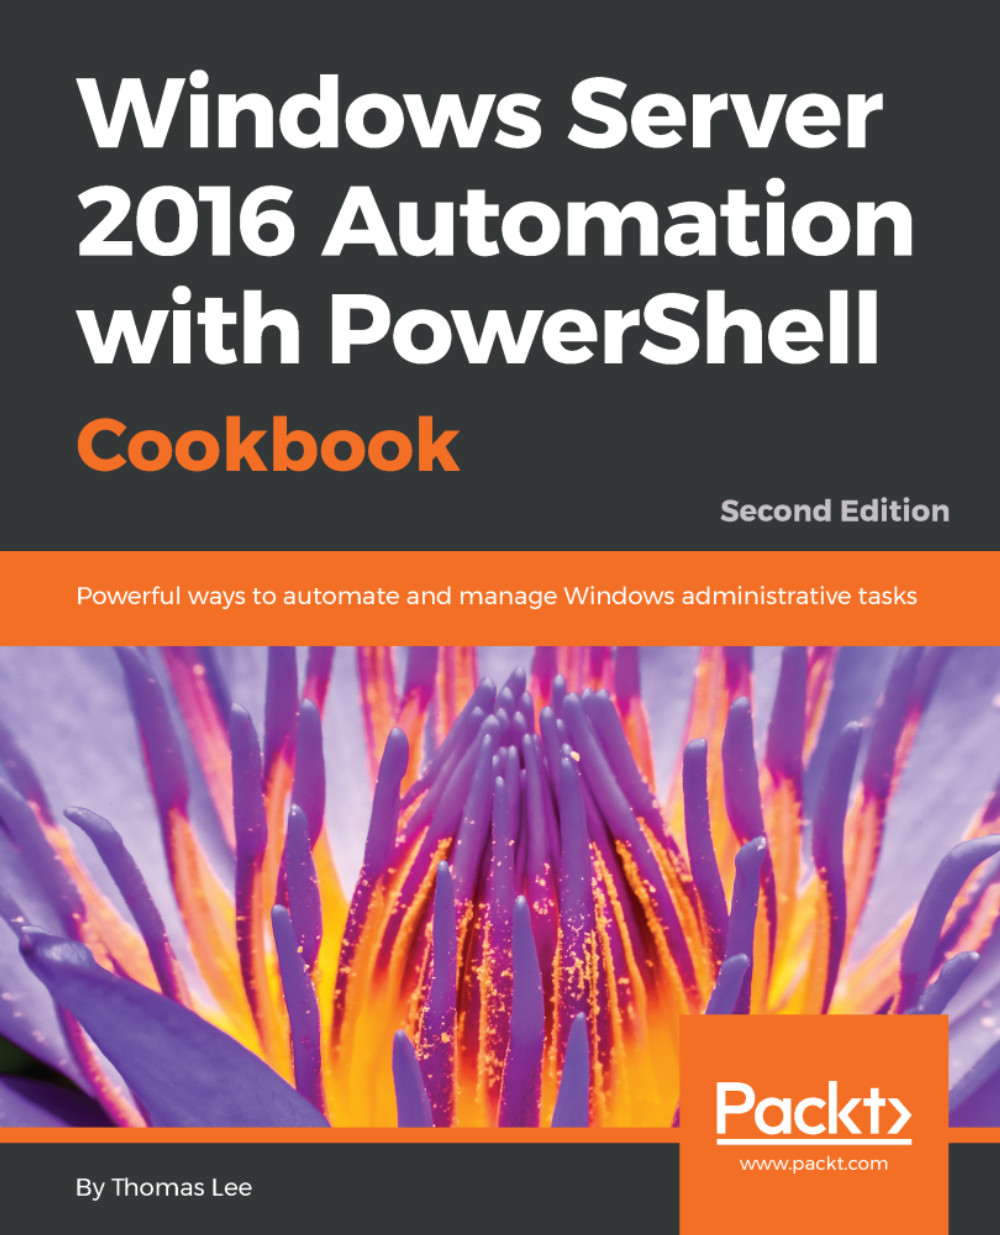 Windows Server 2016 Automation with PowerShell Cookbook: Powerful ways to automate and manage Windows administrative tasks, Second Edition